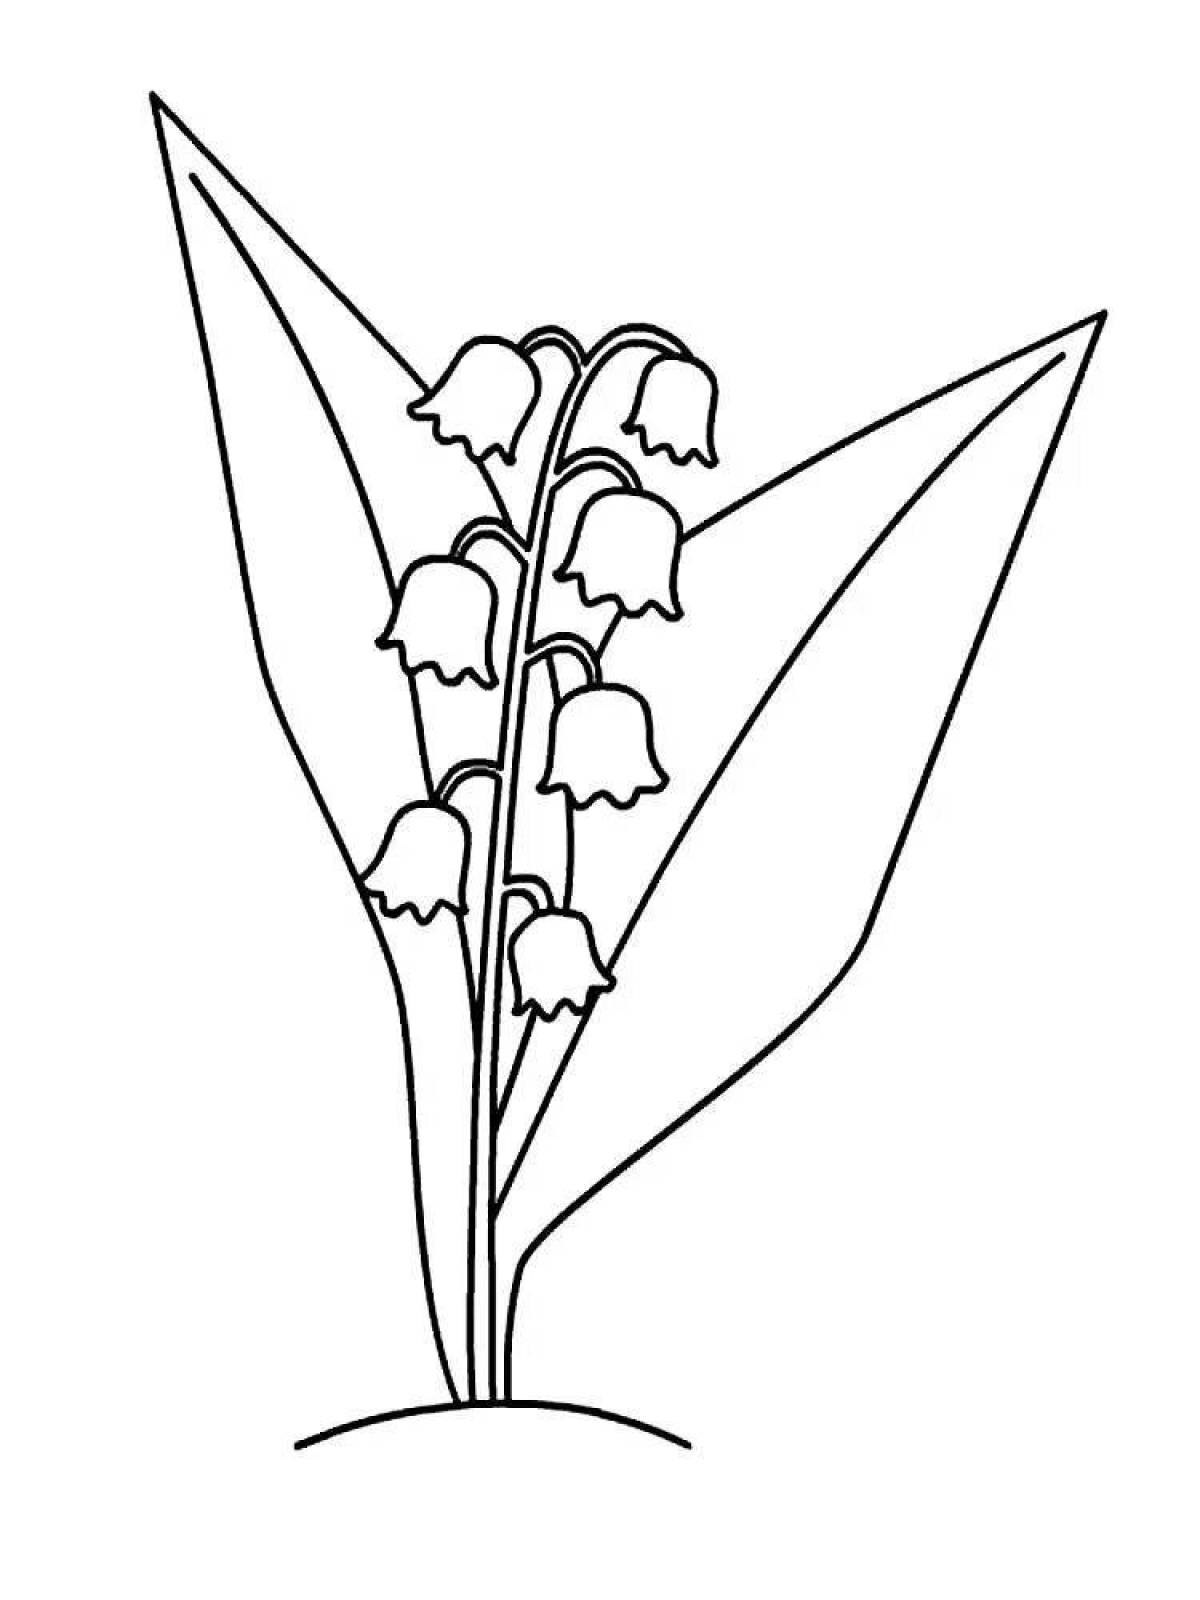 Blissful lily of the valley coloring book for kids